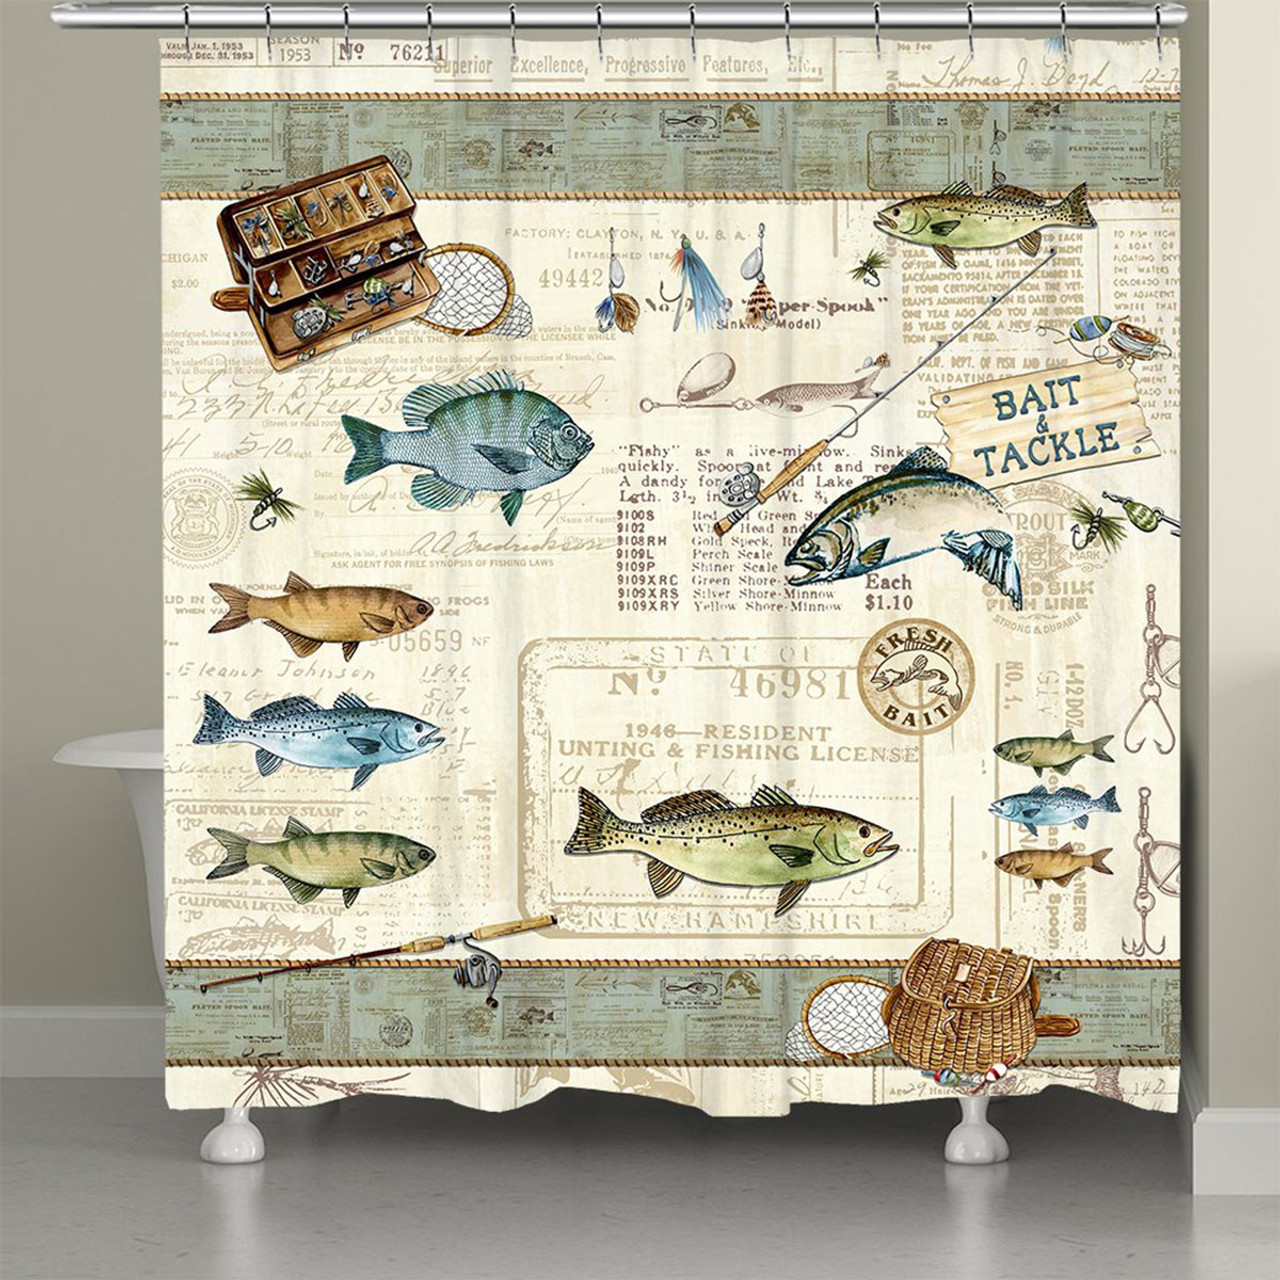 Vintage Fishing Nets Shower Curtain by Claudia O'Brien - Pixels